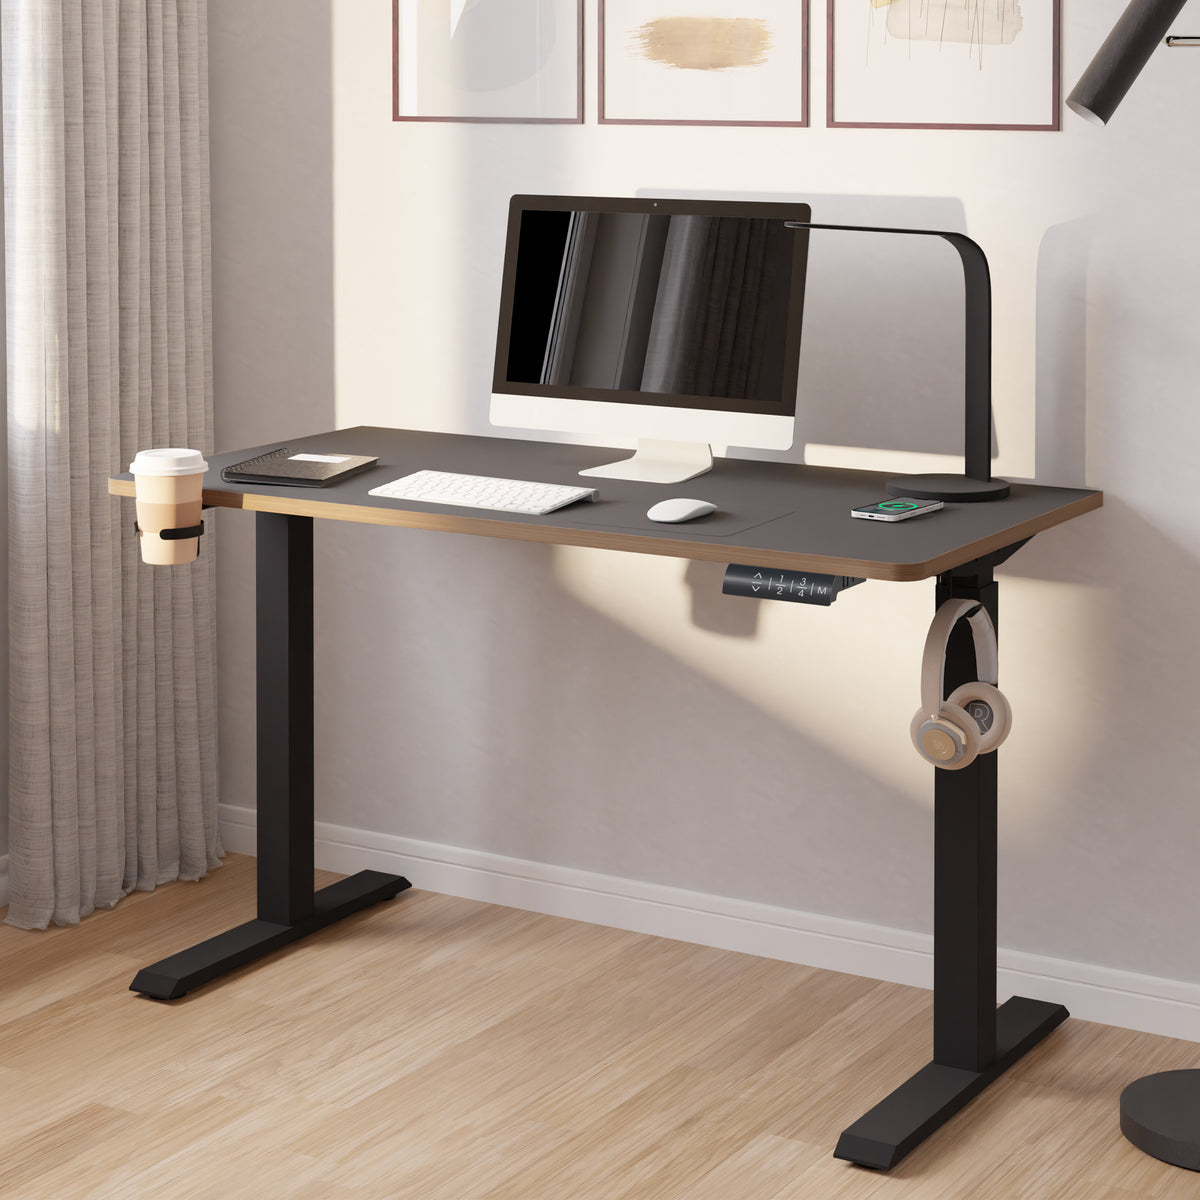 Koble Gino Black Smart Electric Height Adjustable Desk for home office